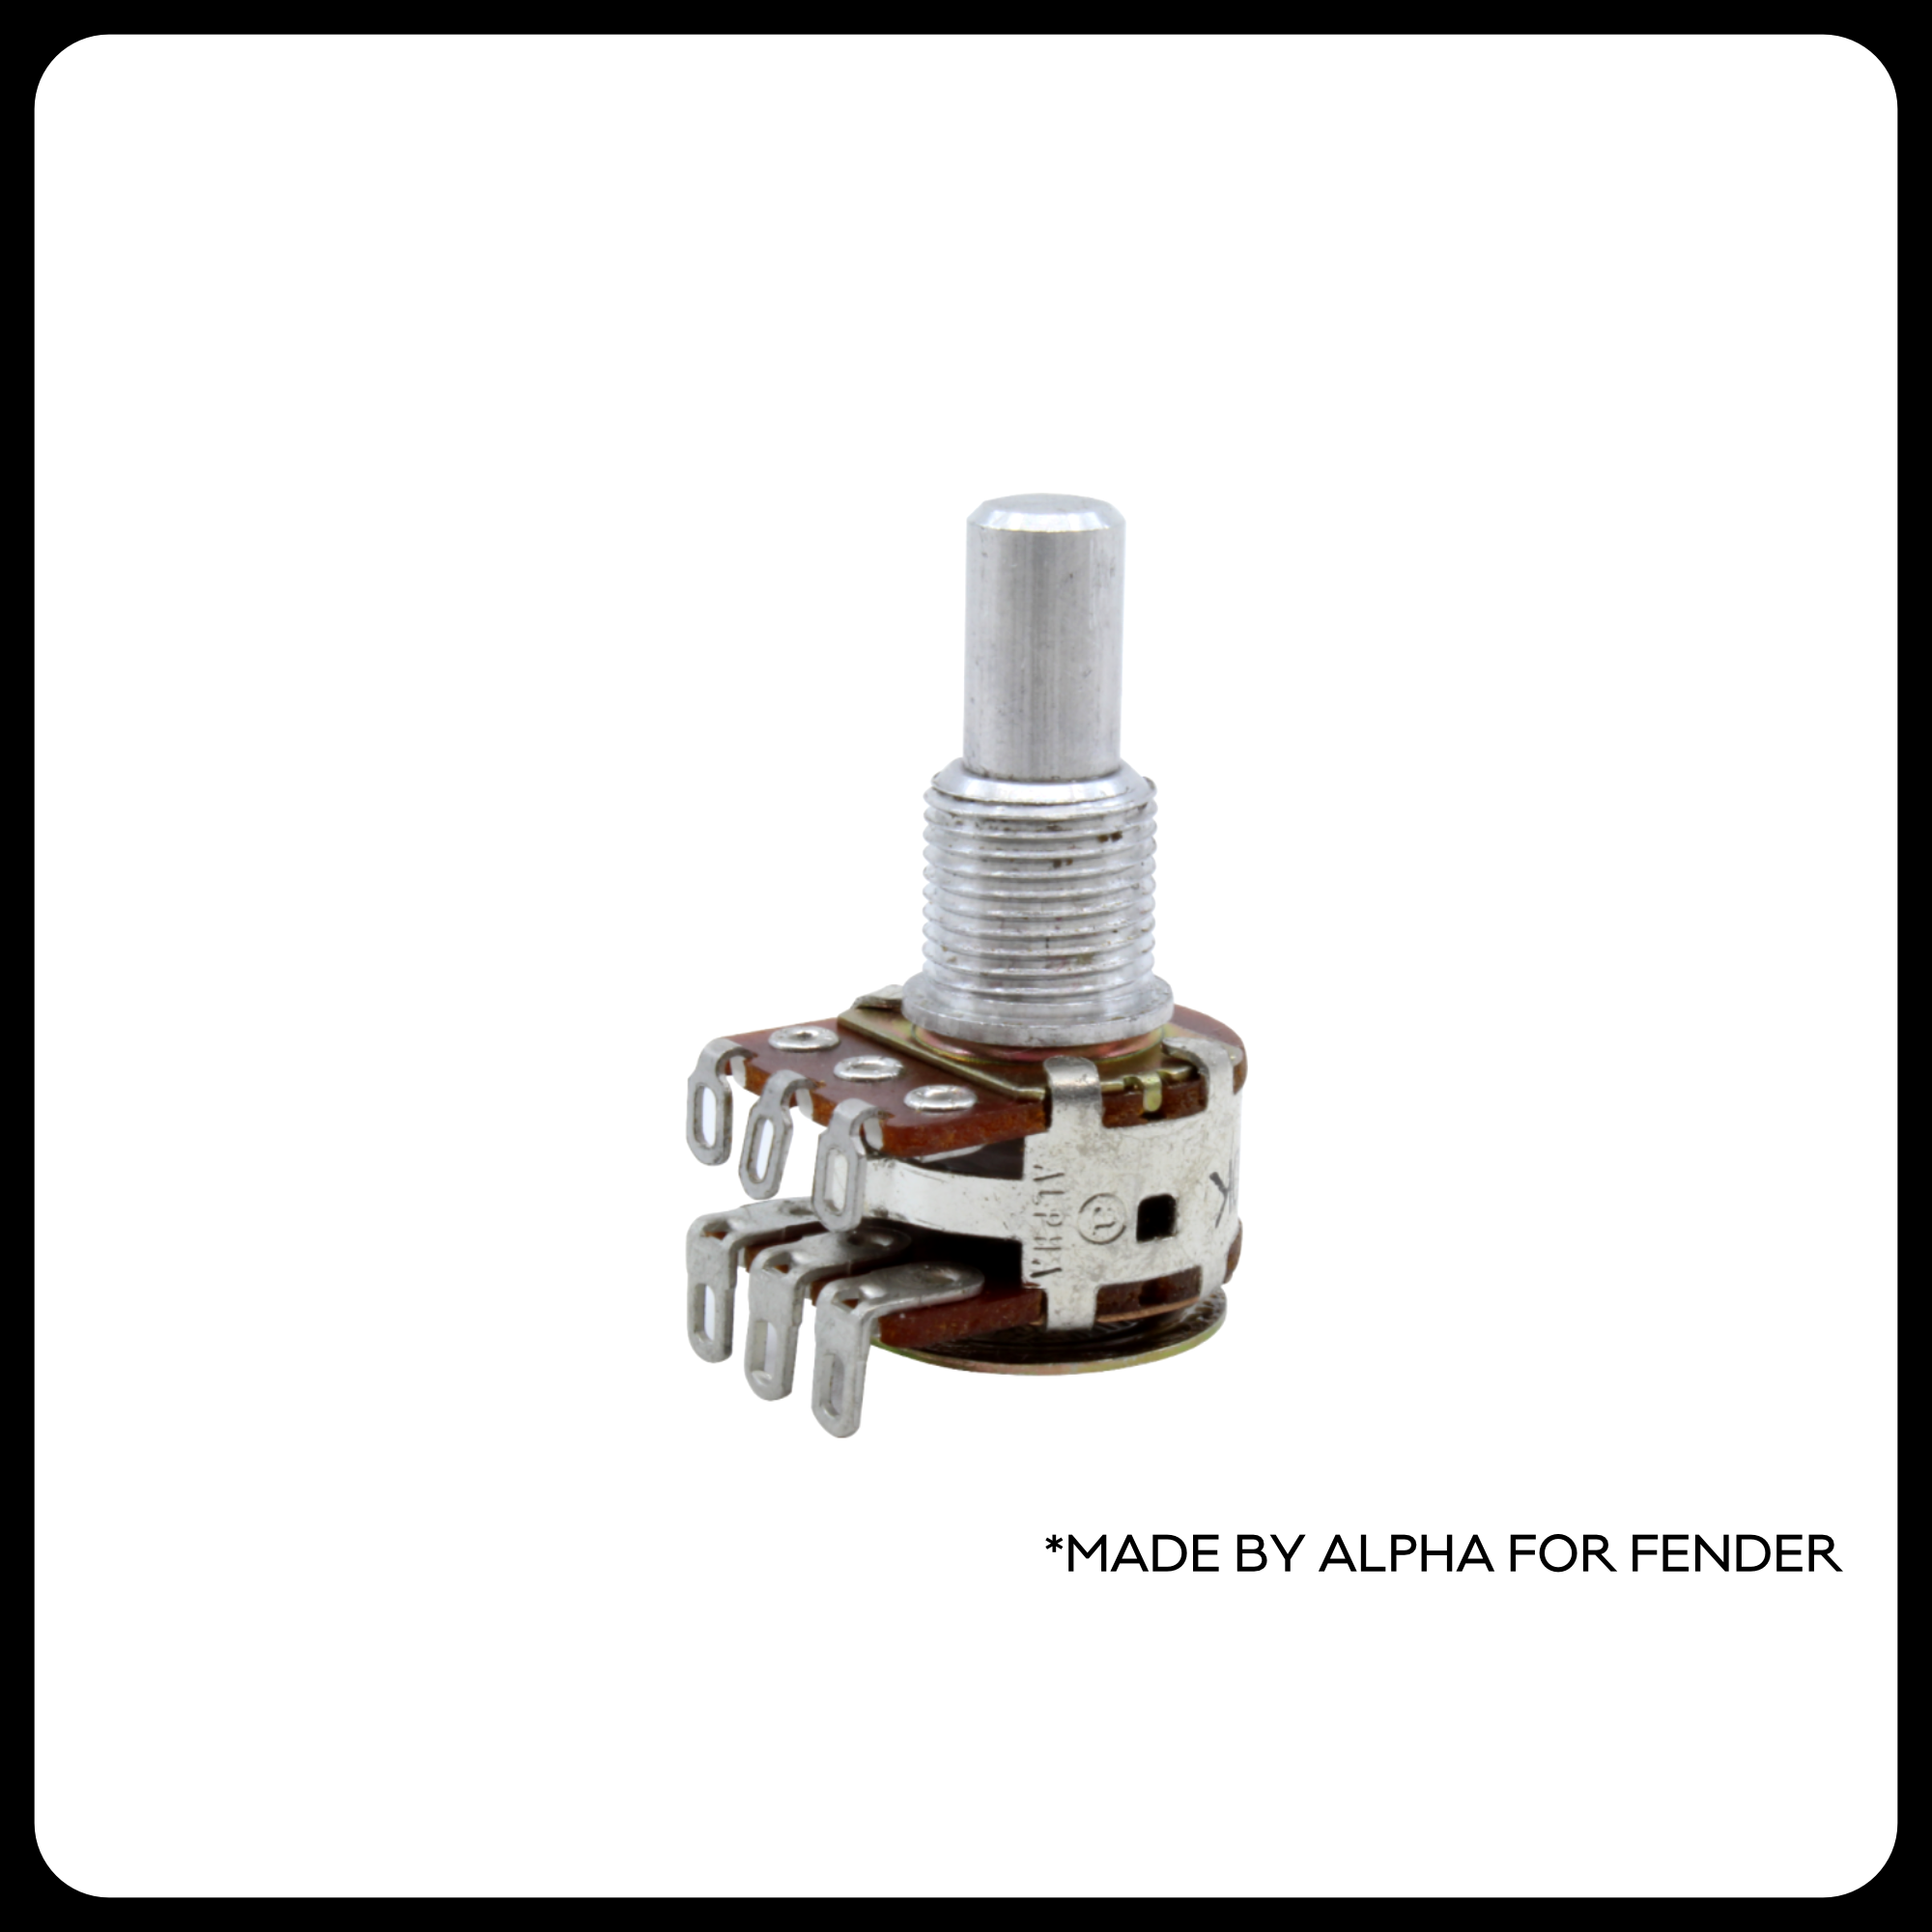 Fender® Dual gang Potentiometer, 250kΩ, Pan, MN Taper, Solid Shaft (made by Alpha for Fender)